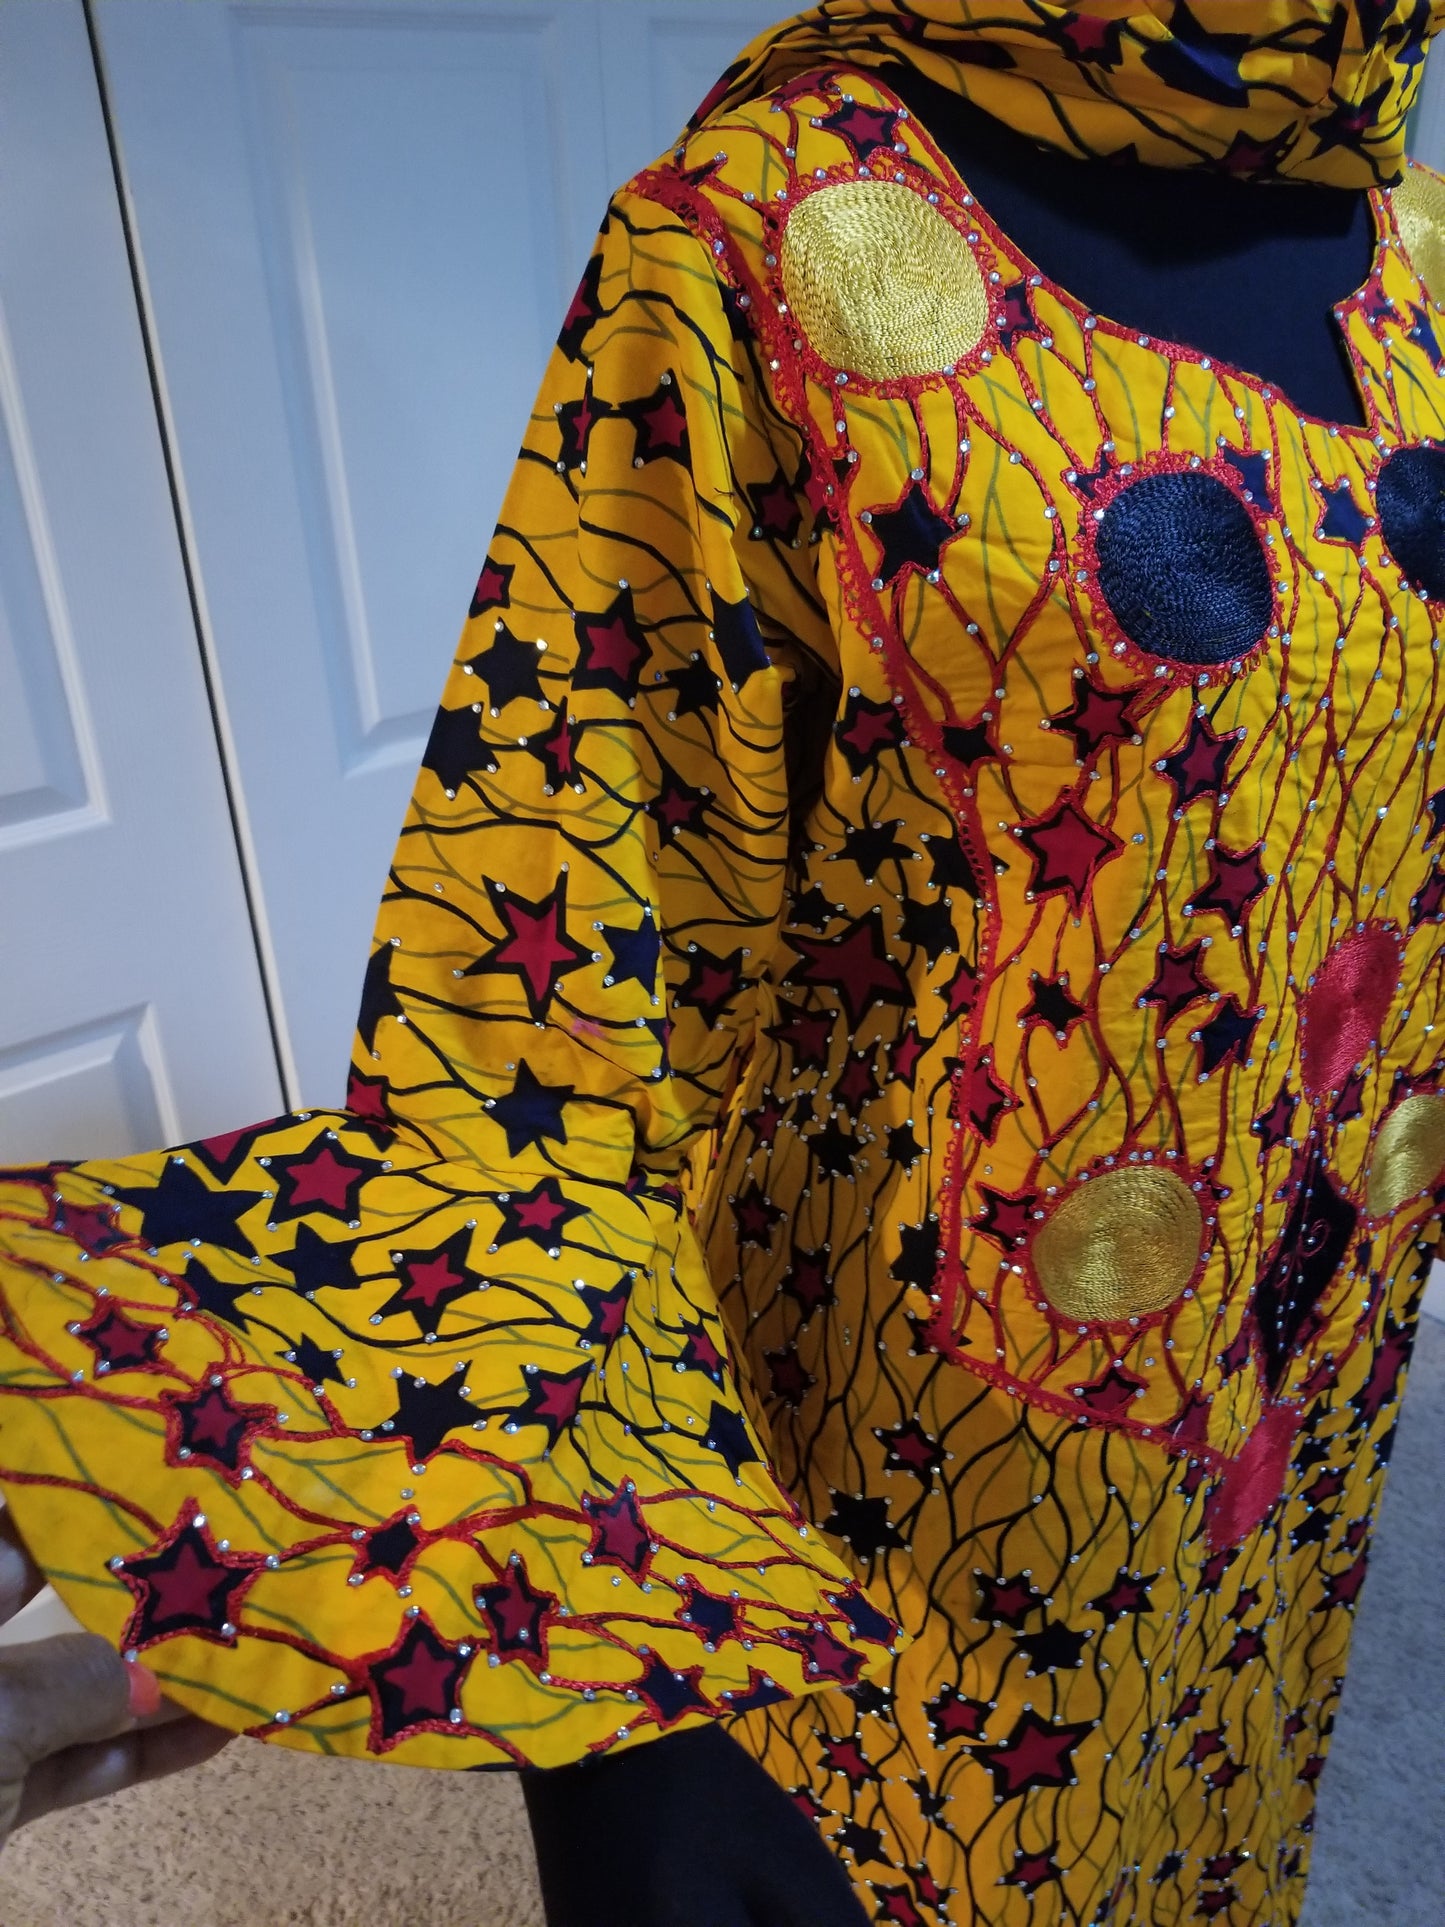 Sale sale: embriodered and stoned yellow star Ankara-dress, embellished with shinning Swarovski stones to perfection! Fit Burst 52" and 57" lenght shoulder to floor. Made with Quality hitarget Ankara. Comes with a matching headtie. Flared sleeves